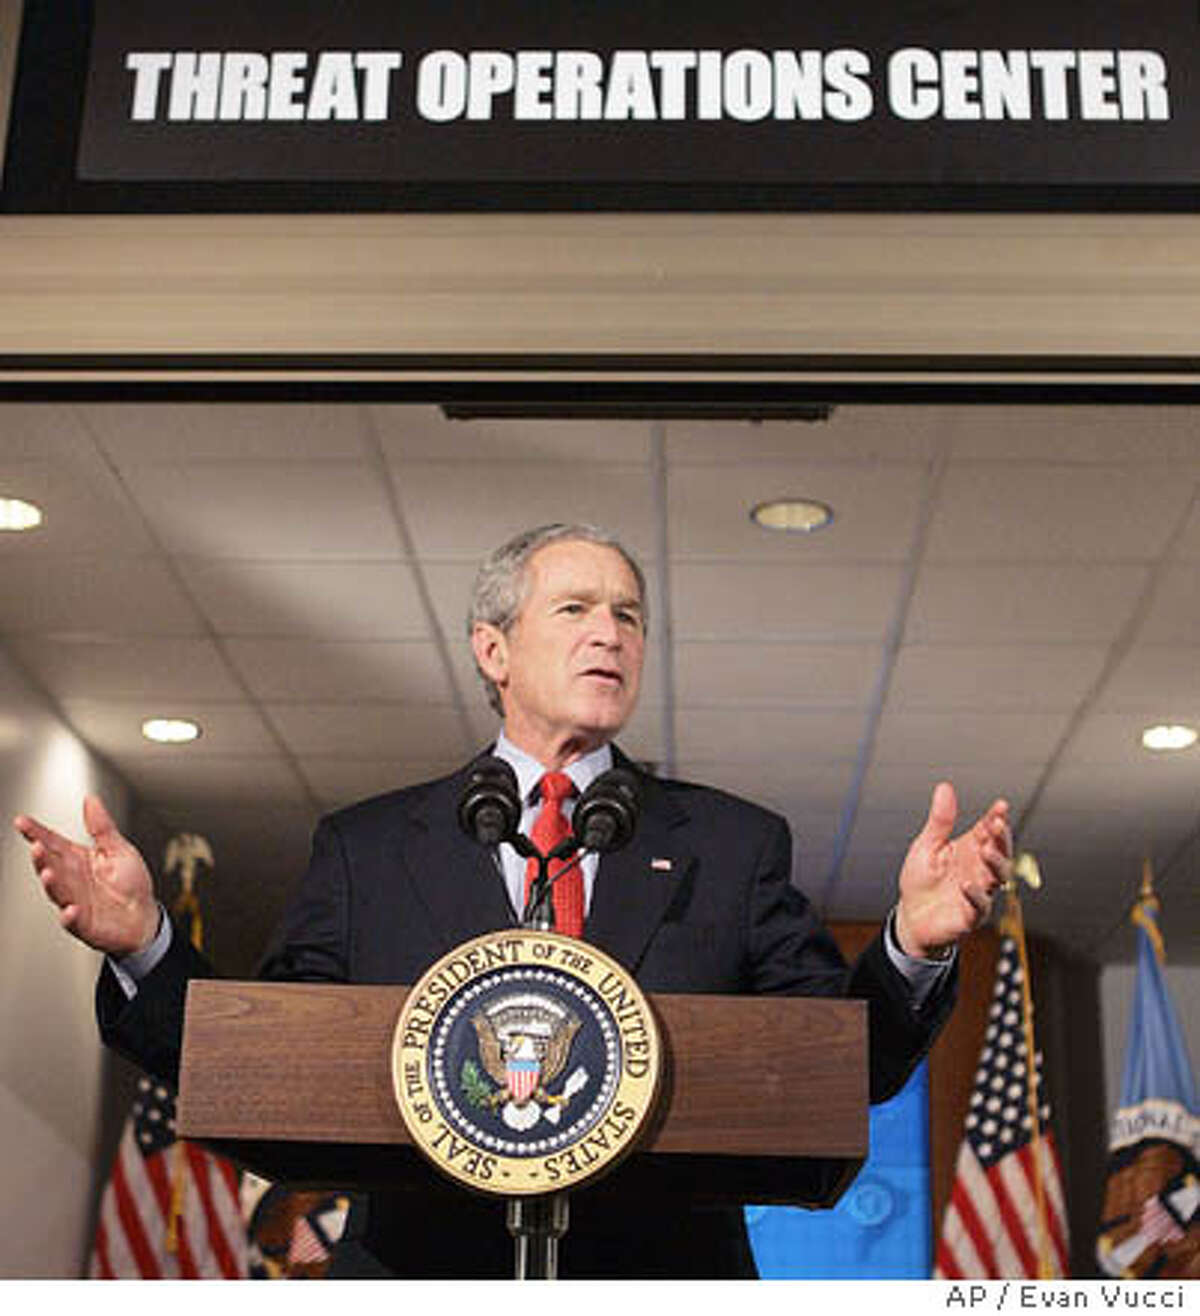 President Bush gestures during a statement at the National Security Agency on Wednesday, Jan. 25, 2006, in Fort Meade, Md. Bush travelled to the heavily-secured site of the super-secret spy agency in suburban Maryland to give a speech behind closed doors and meet with employees in advance of Senate hearings on the much-criticized domestic surveillance. (AP Photo/Evan Vucci)